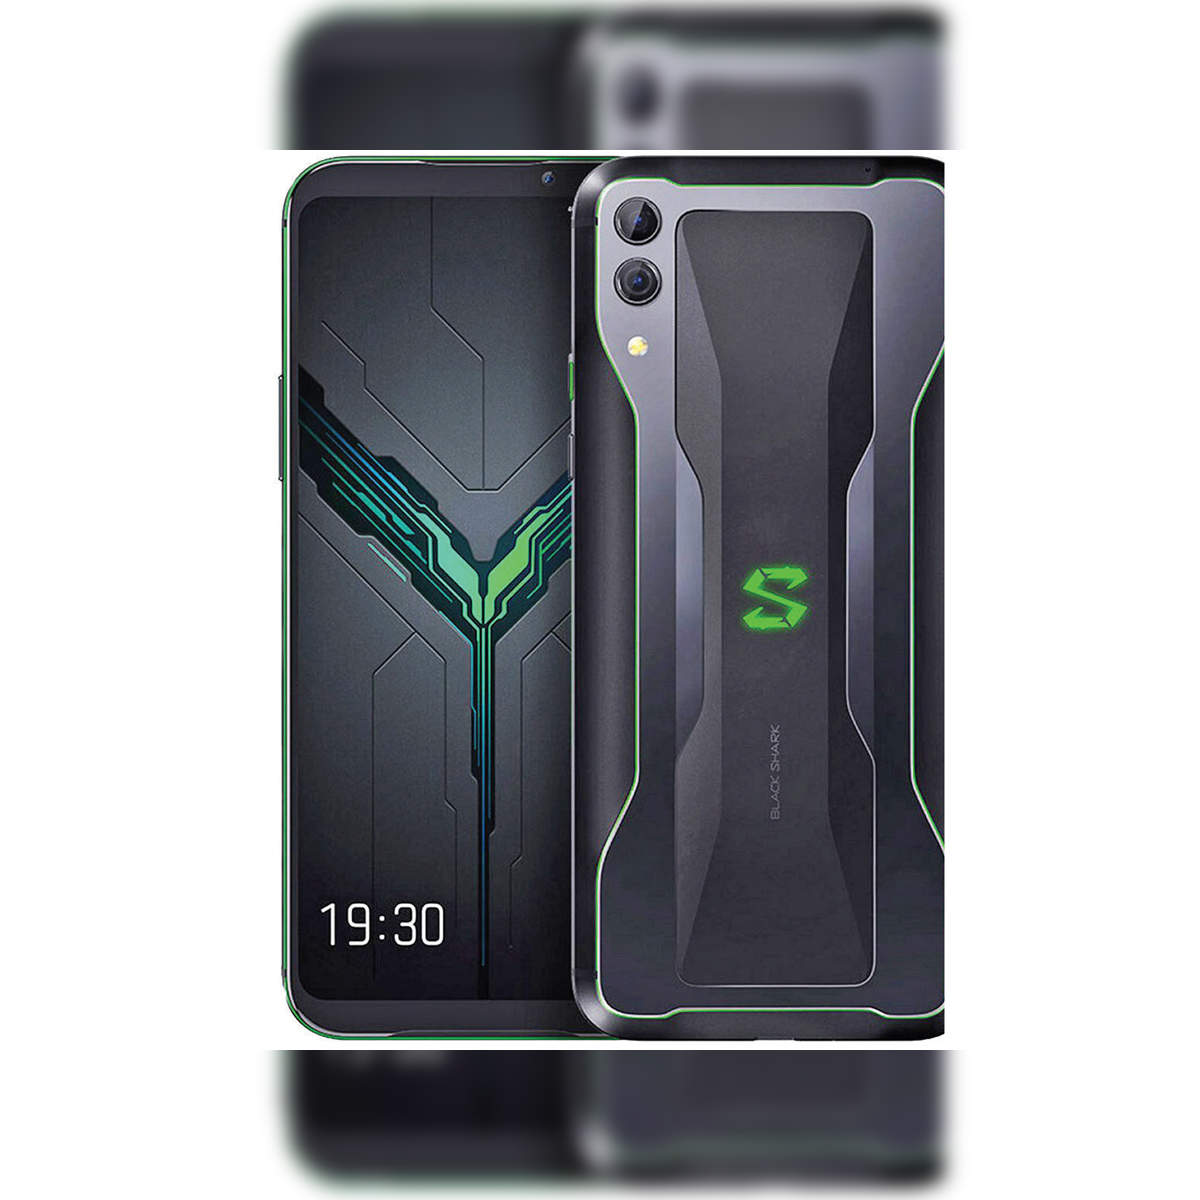 The Black Shark 5 Pro, Black Shark 5 RS, and Black Shark 5 -  specifications, prices, availability